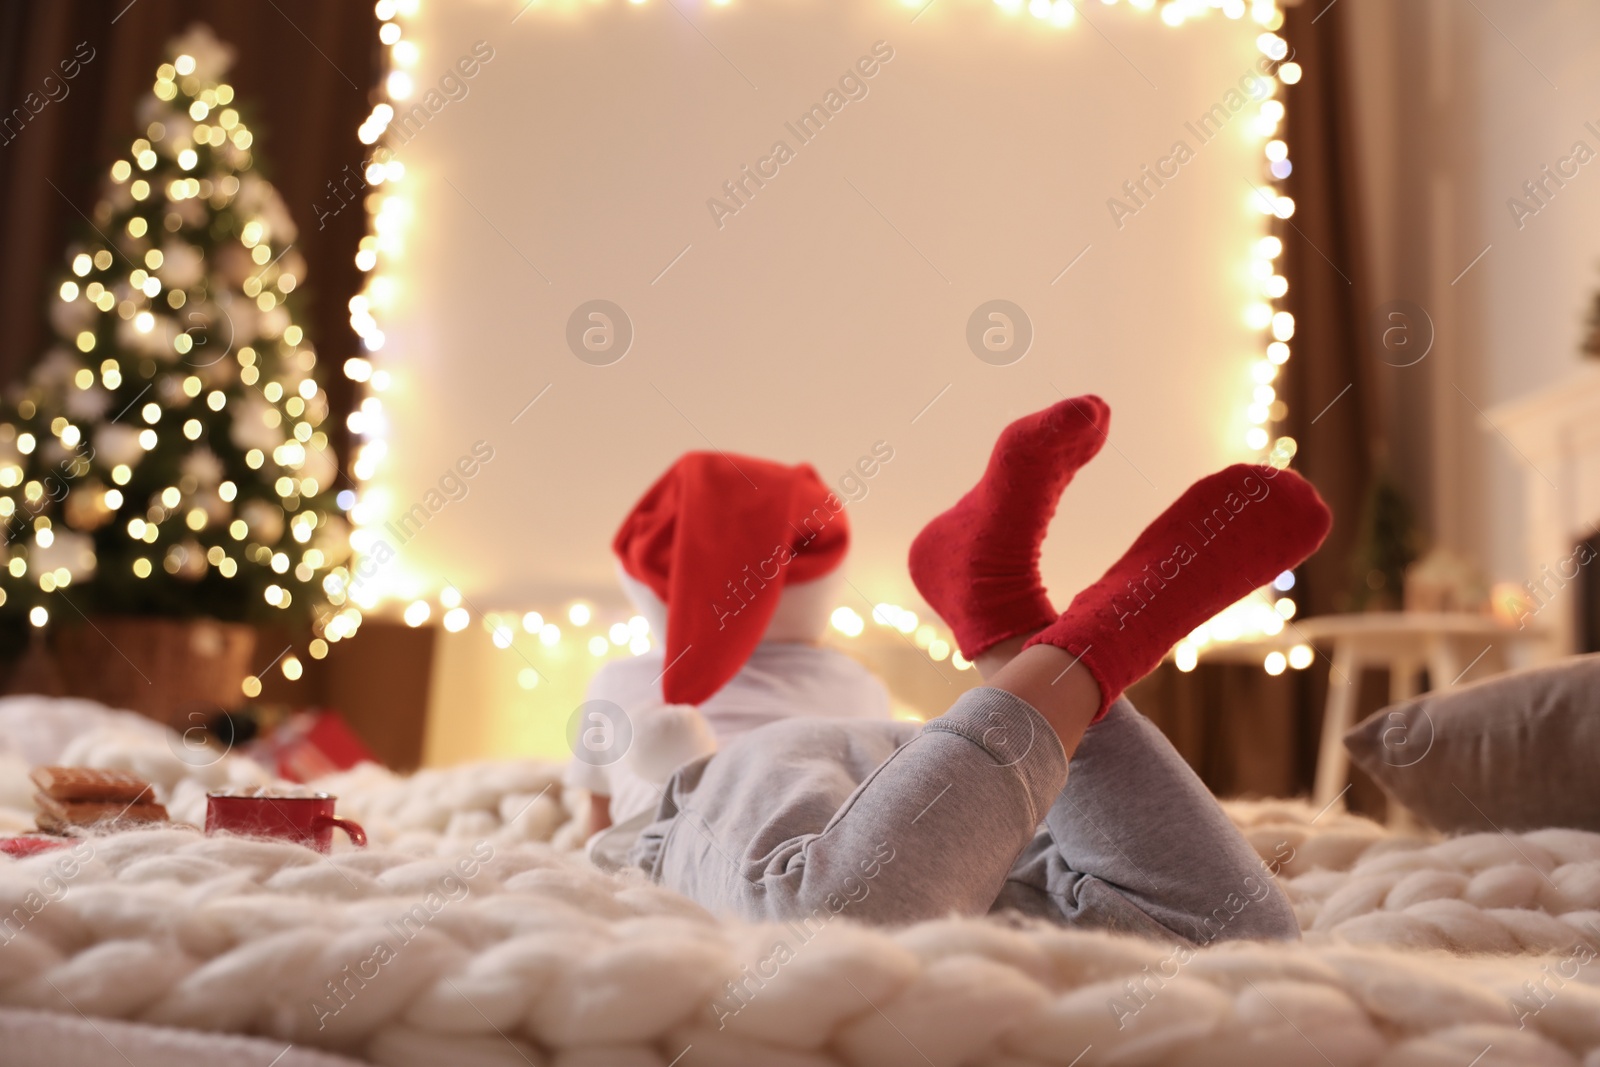 Photo of Child watching movie using video projector at home. Cozy Christmas atmosphere